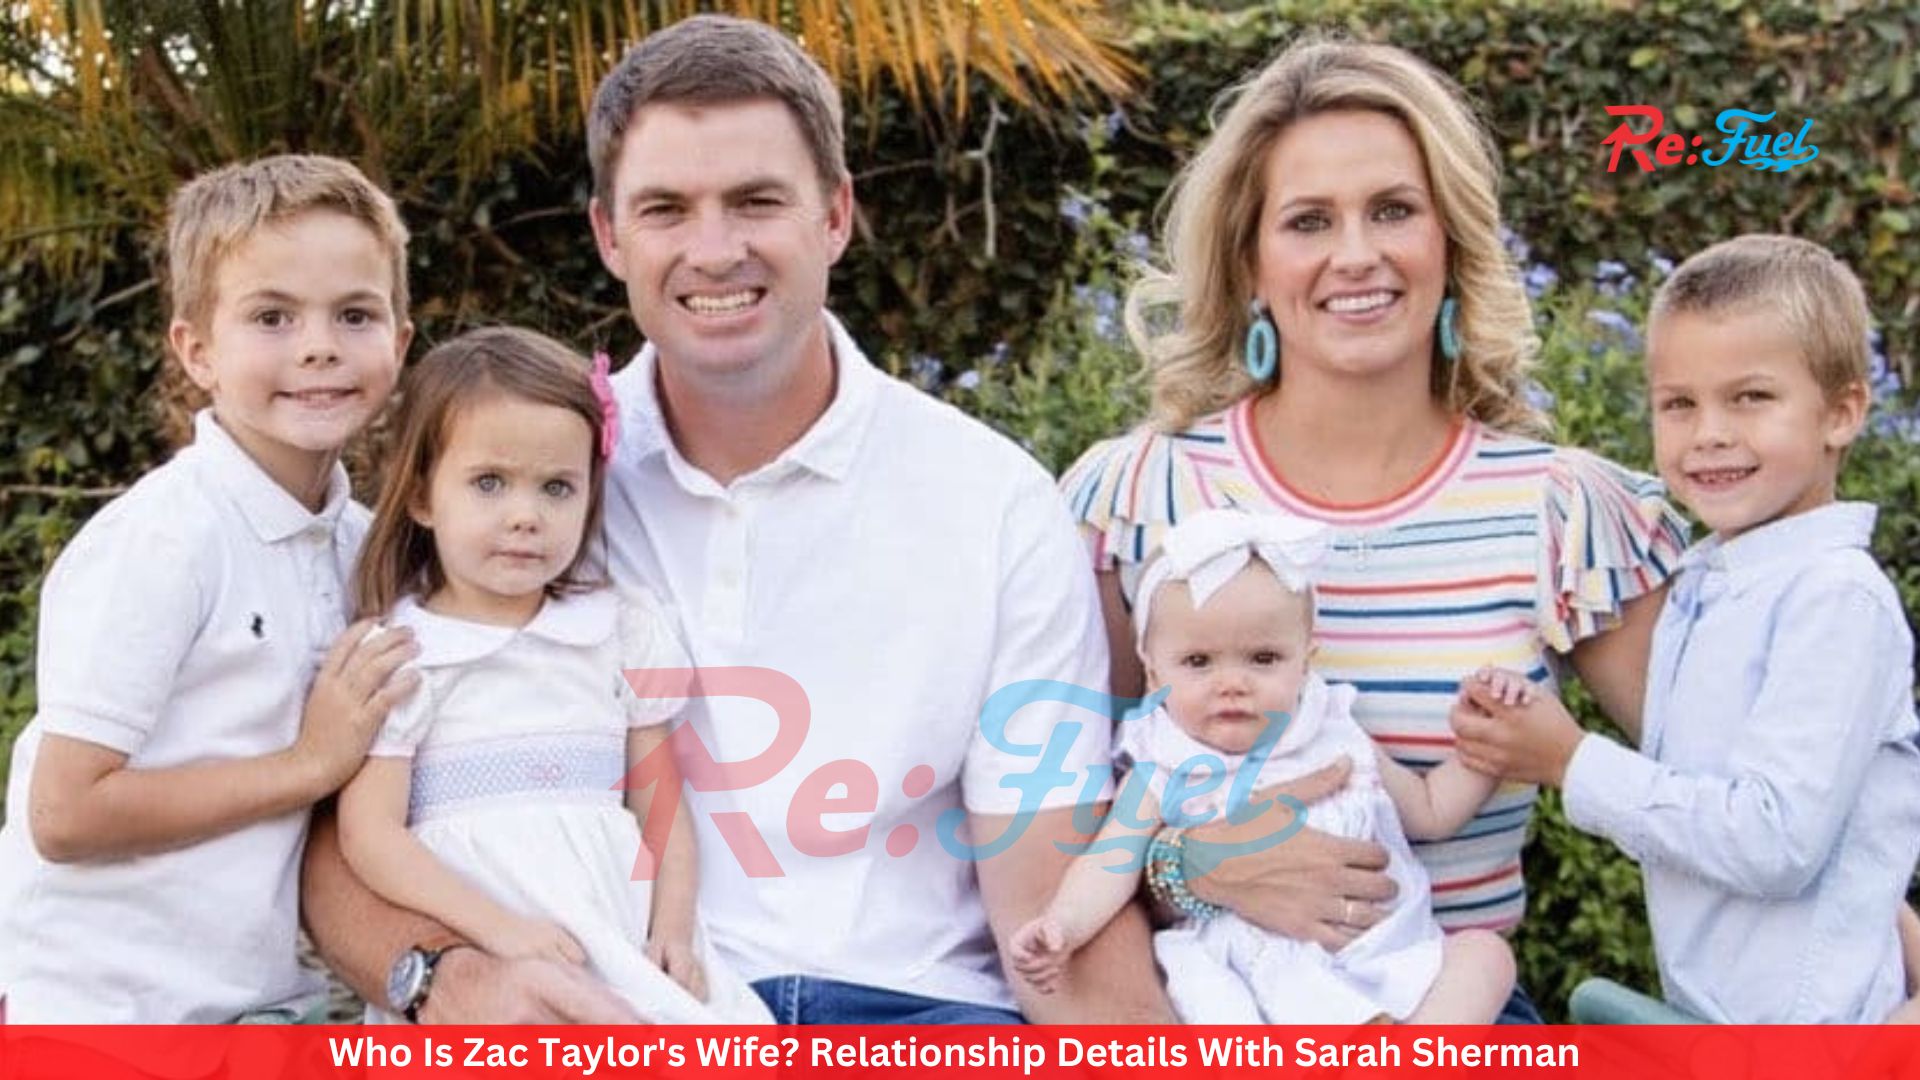 Who Is Zac Taylor's Wife? Relationship Details With Sarah Sherman